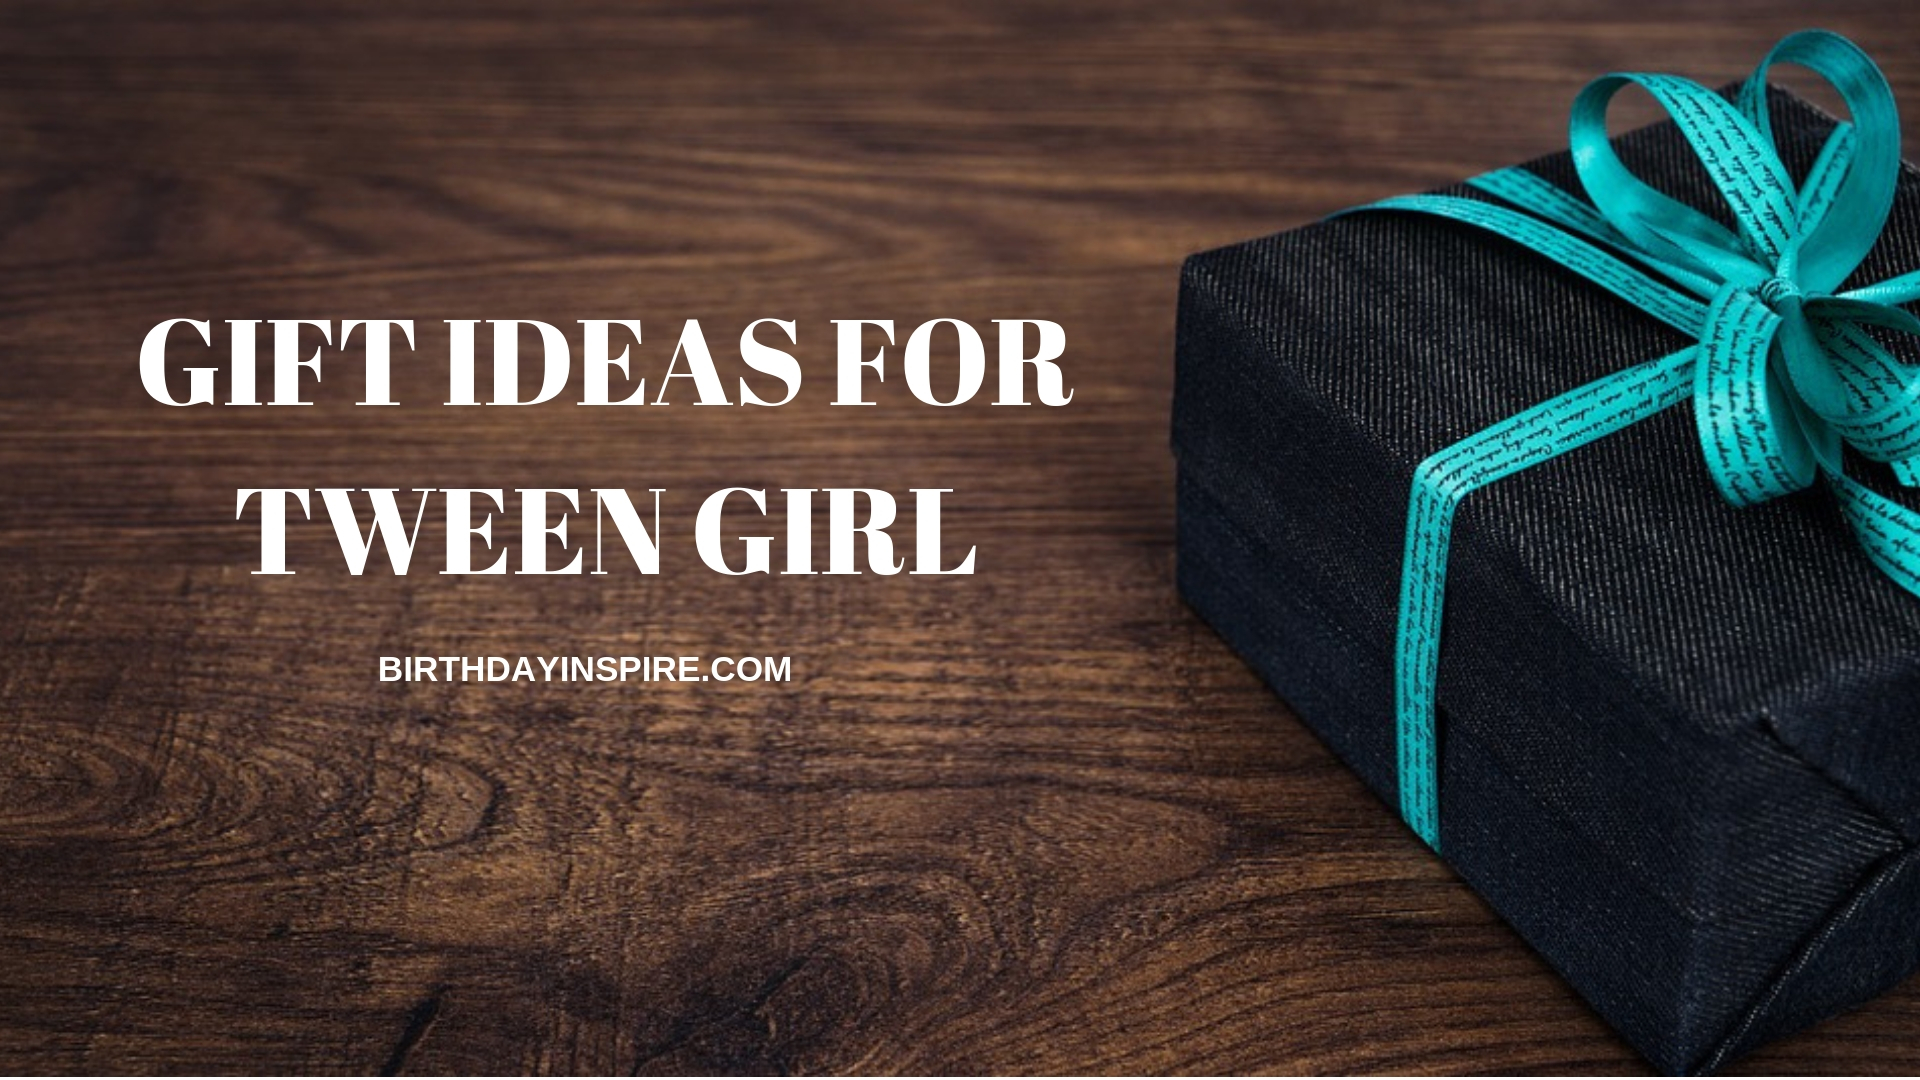 GIFTS IDEAS FOR TWEEN GIRL